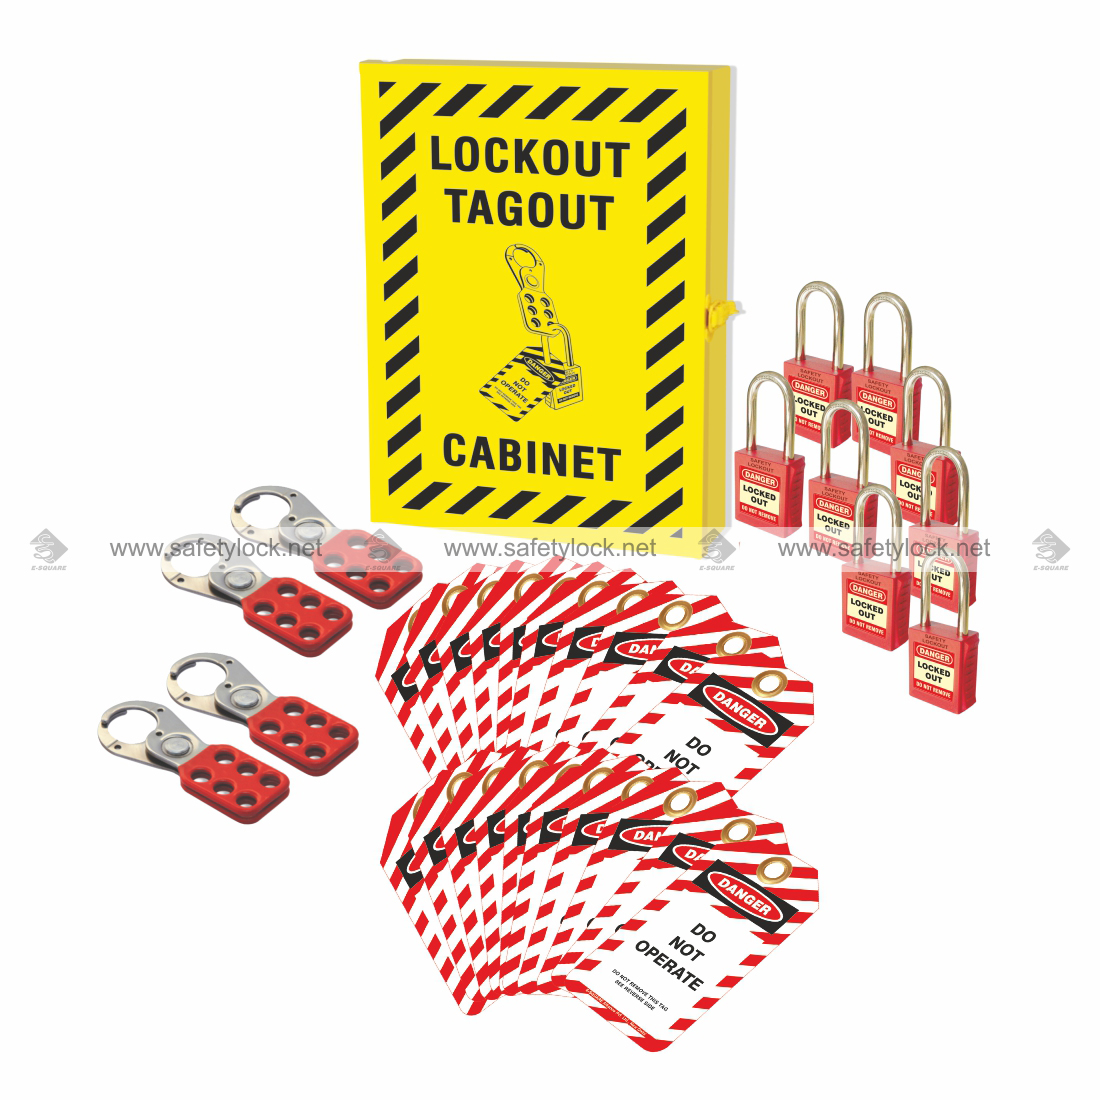 Customised Your Ideal Lockout Tagout Kit with ESquare Allia - Delhi - Delhi ID1557058 3